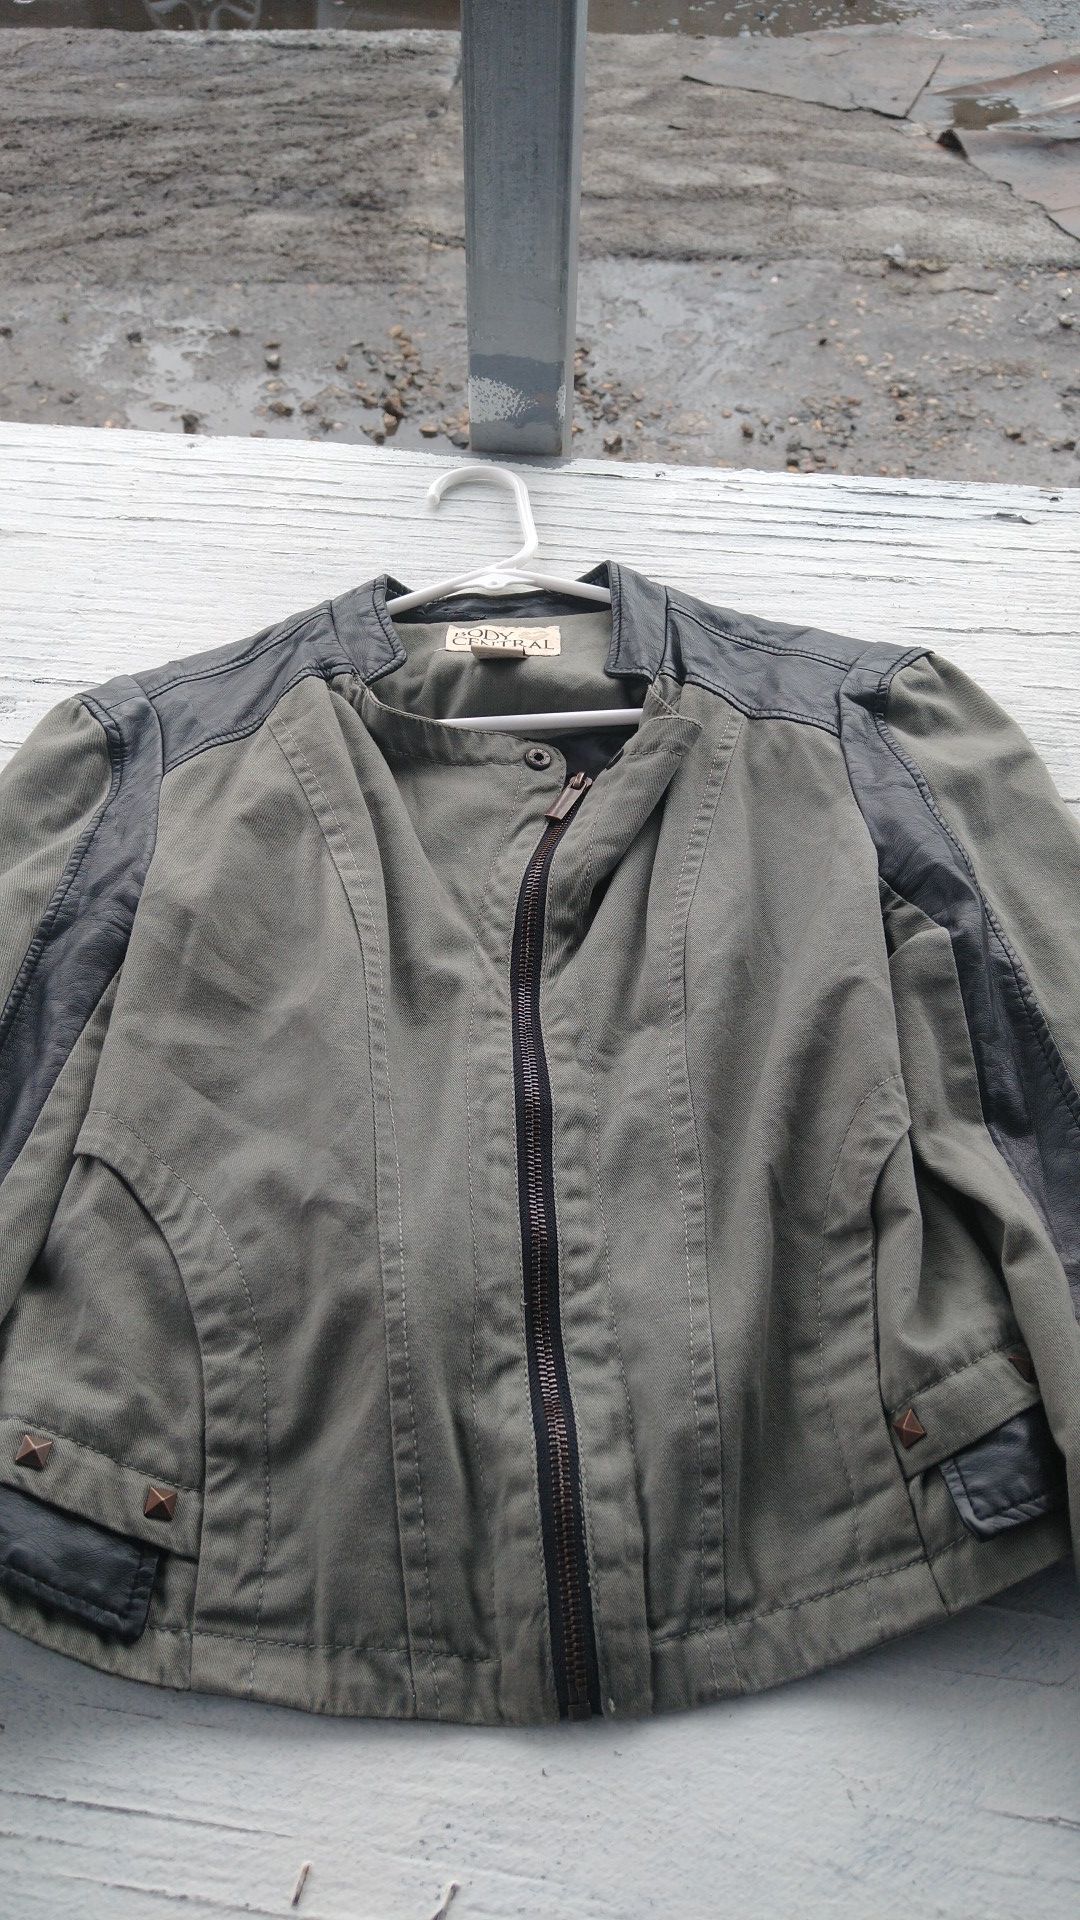 Body central jacket